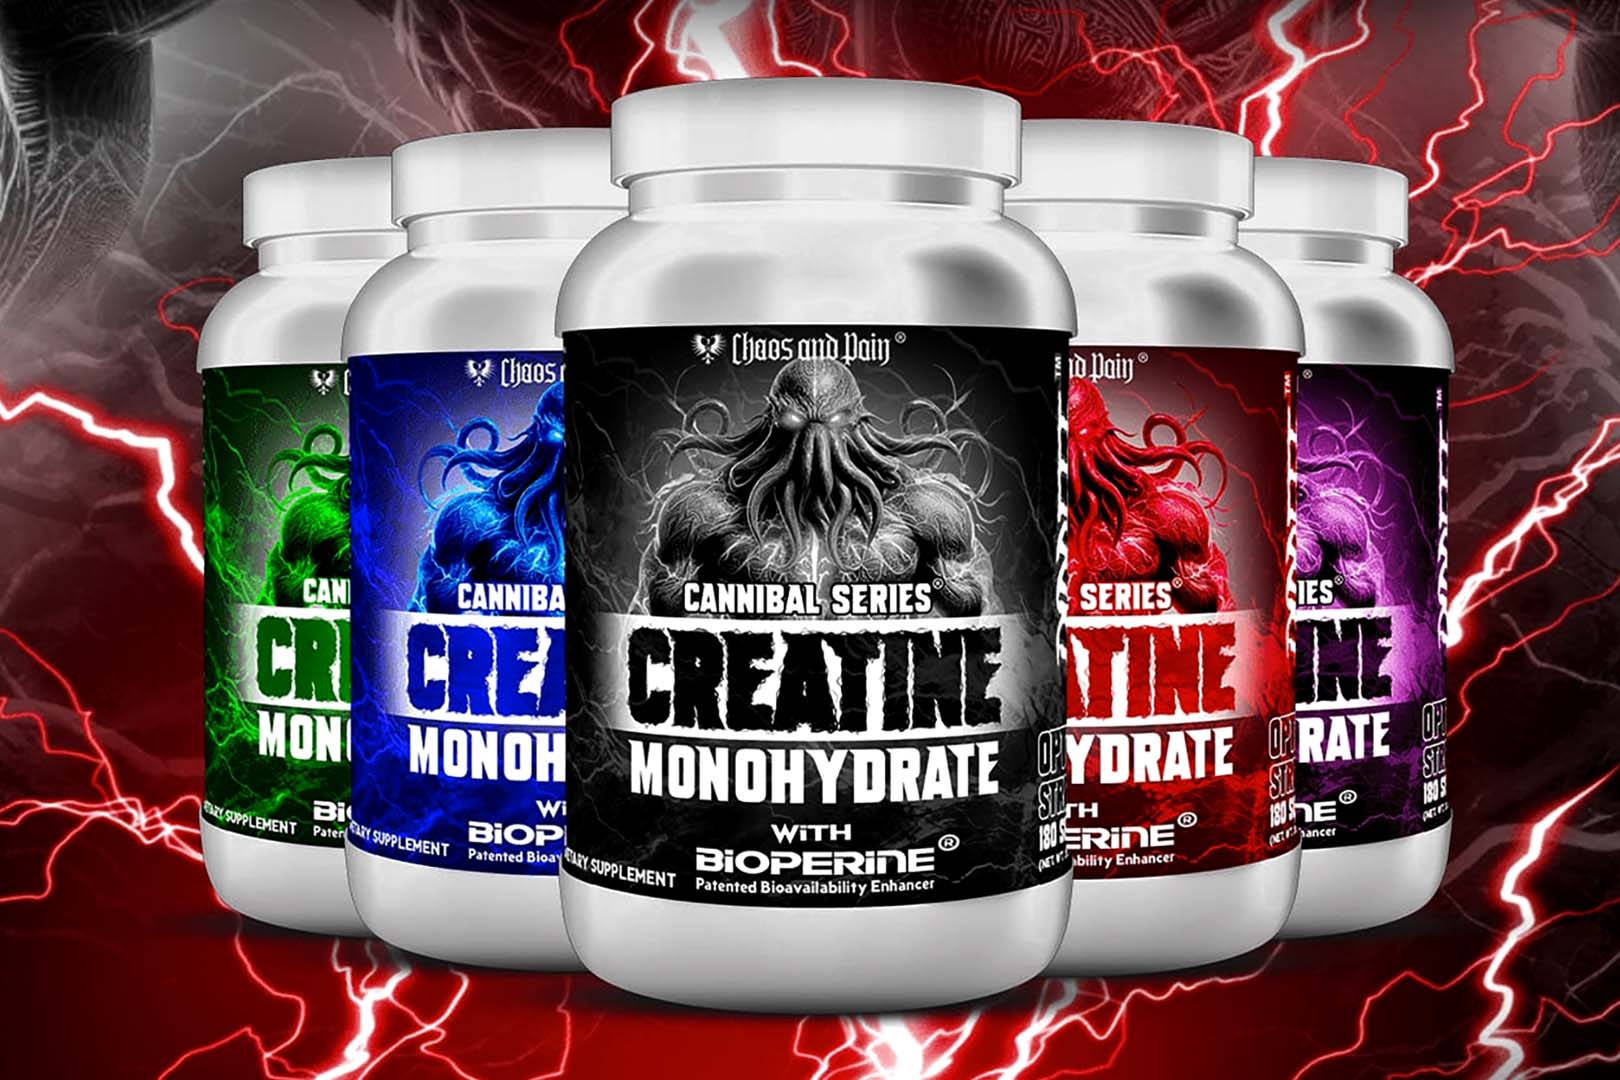 Chaos And Pain Cannibal Creatine